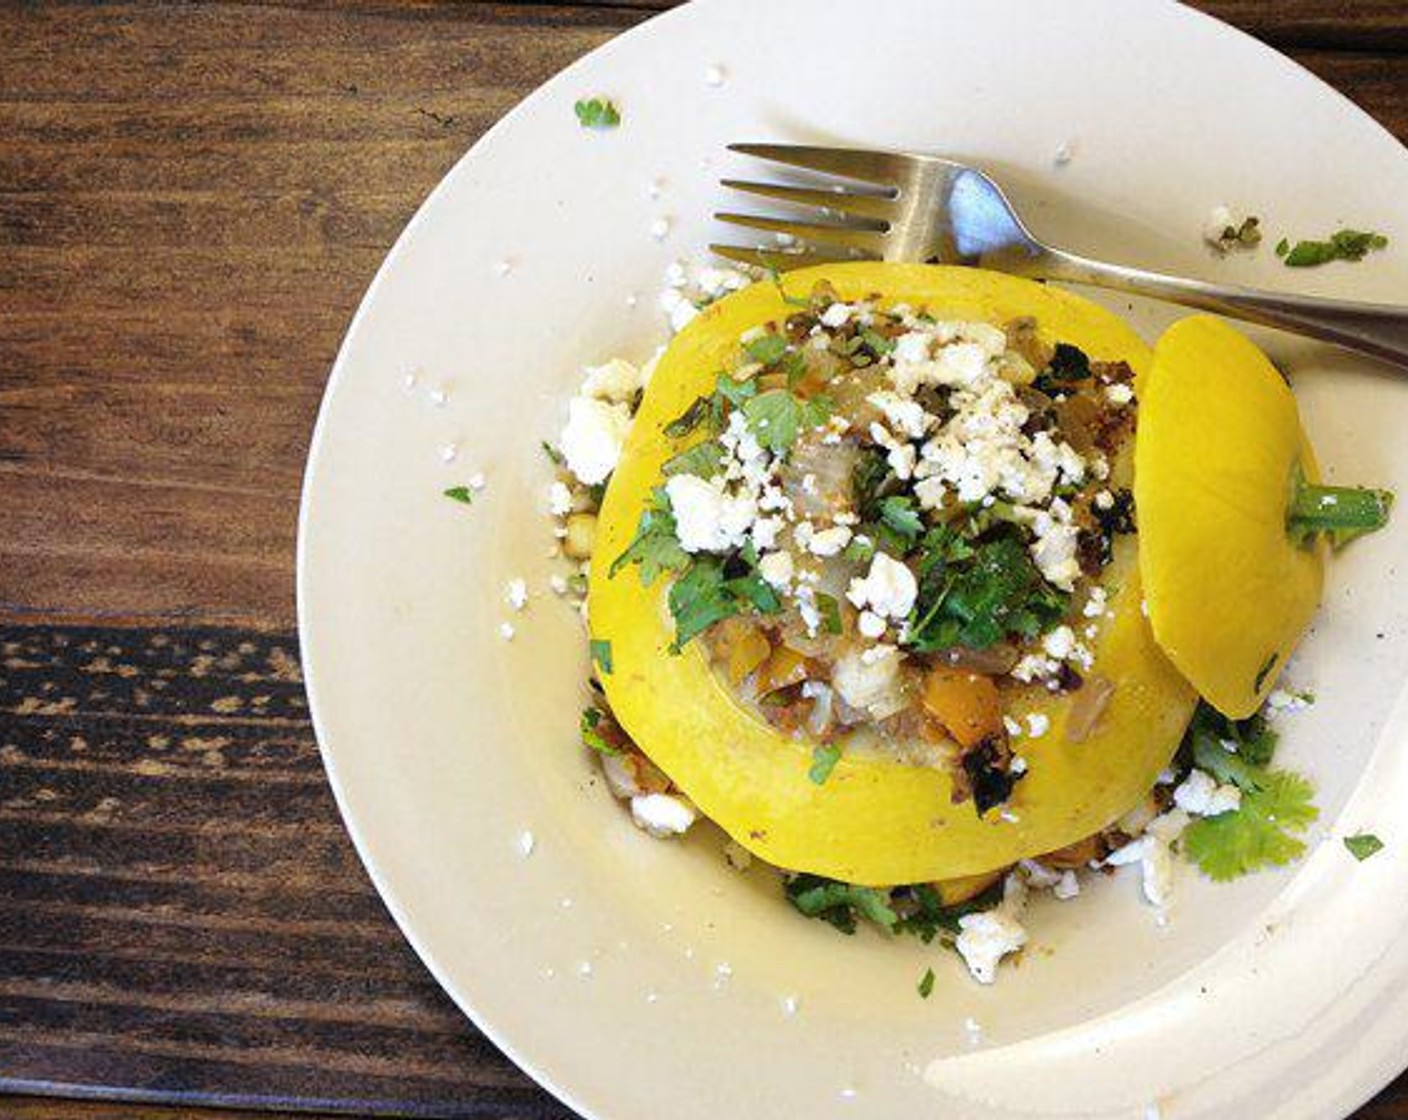 step 6 Once Stuffed Squash have cooked, remove from oven and add Fresh Herbs (to taste) and Feta Cheese (2 Tbsp).